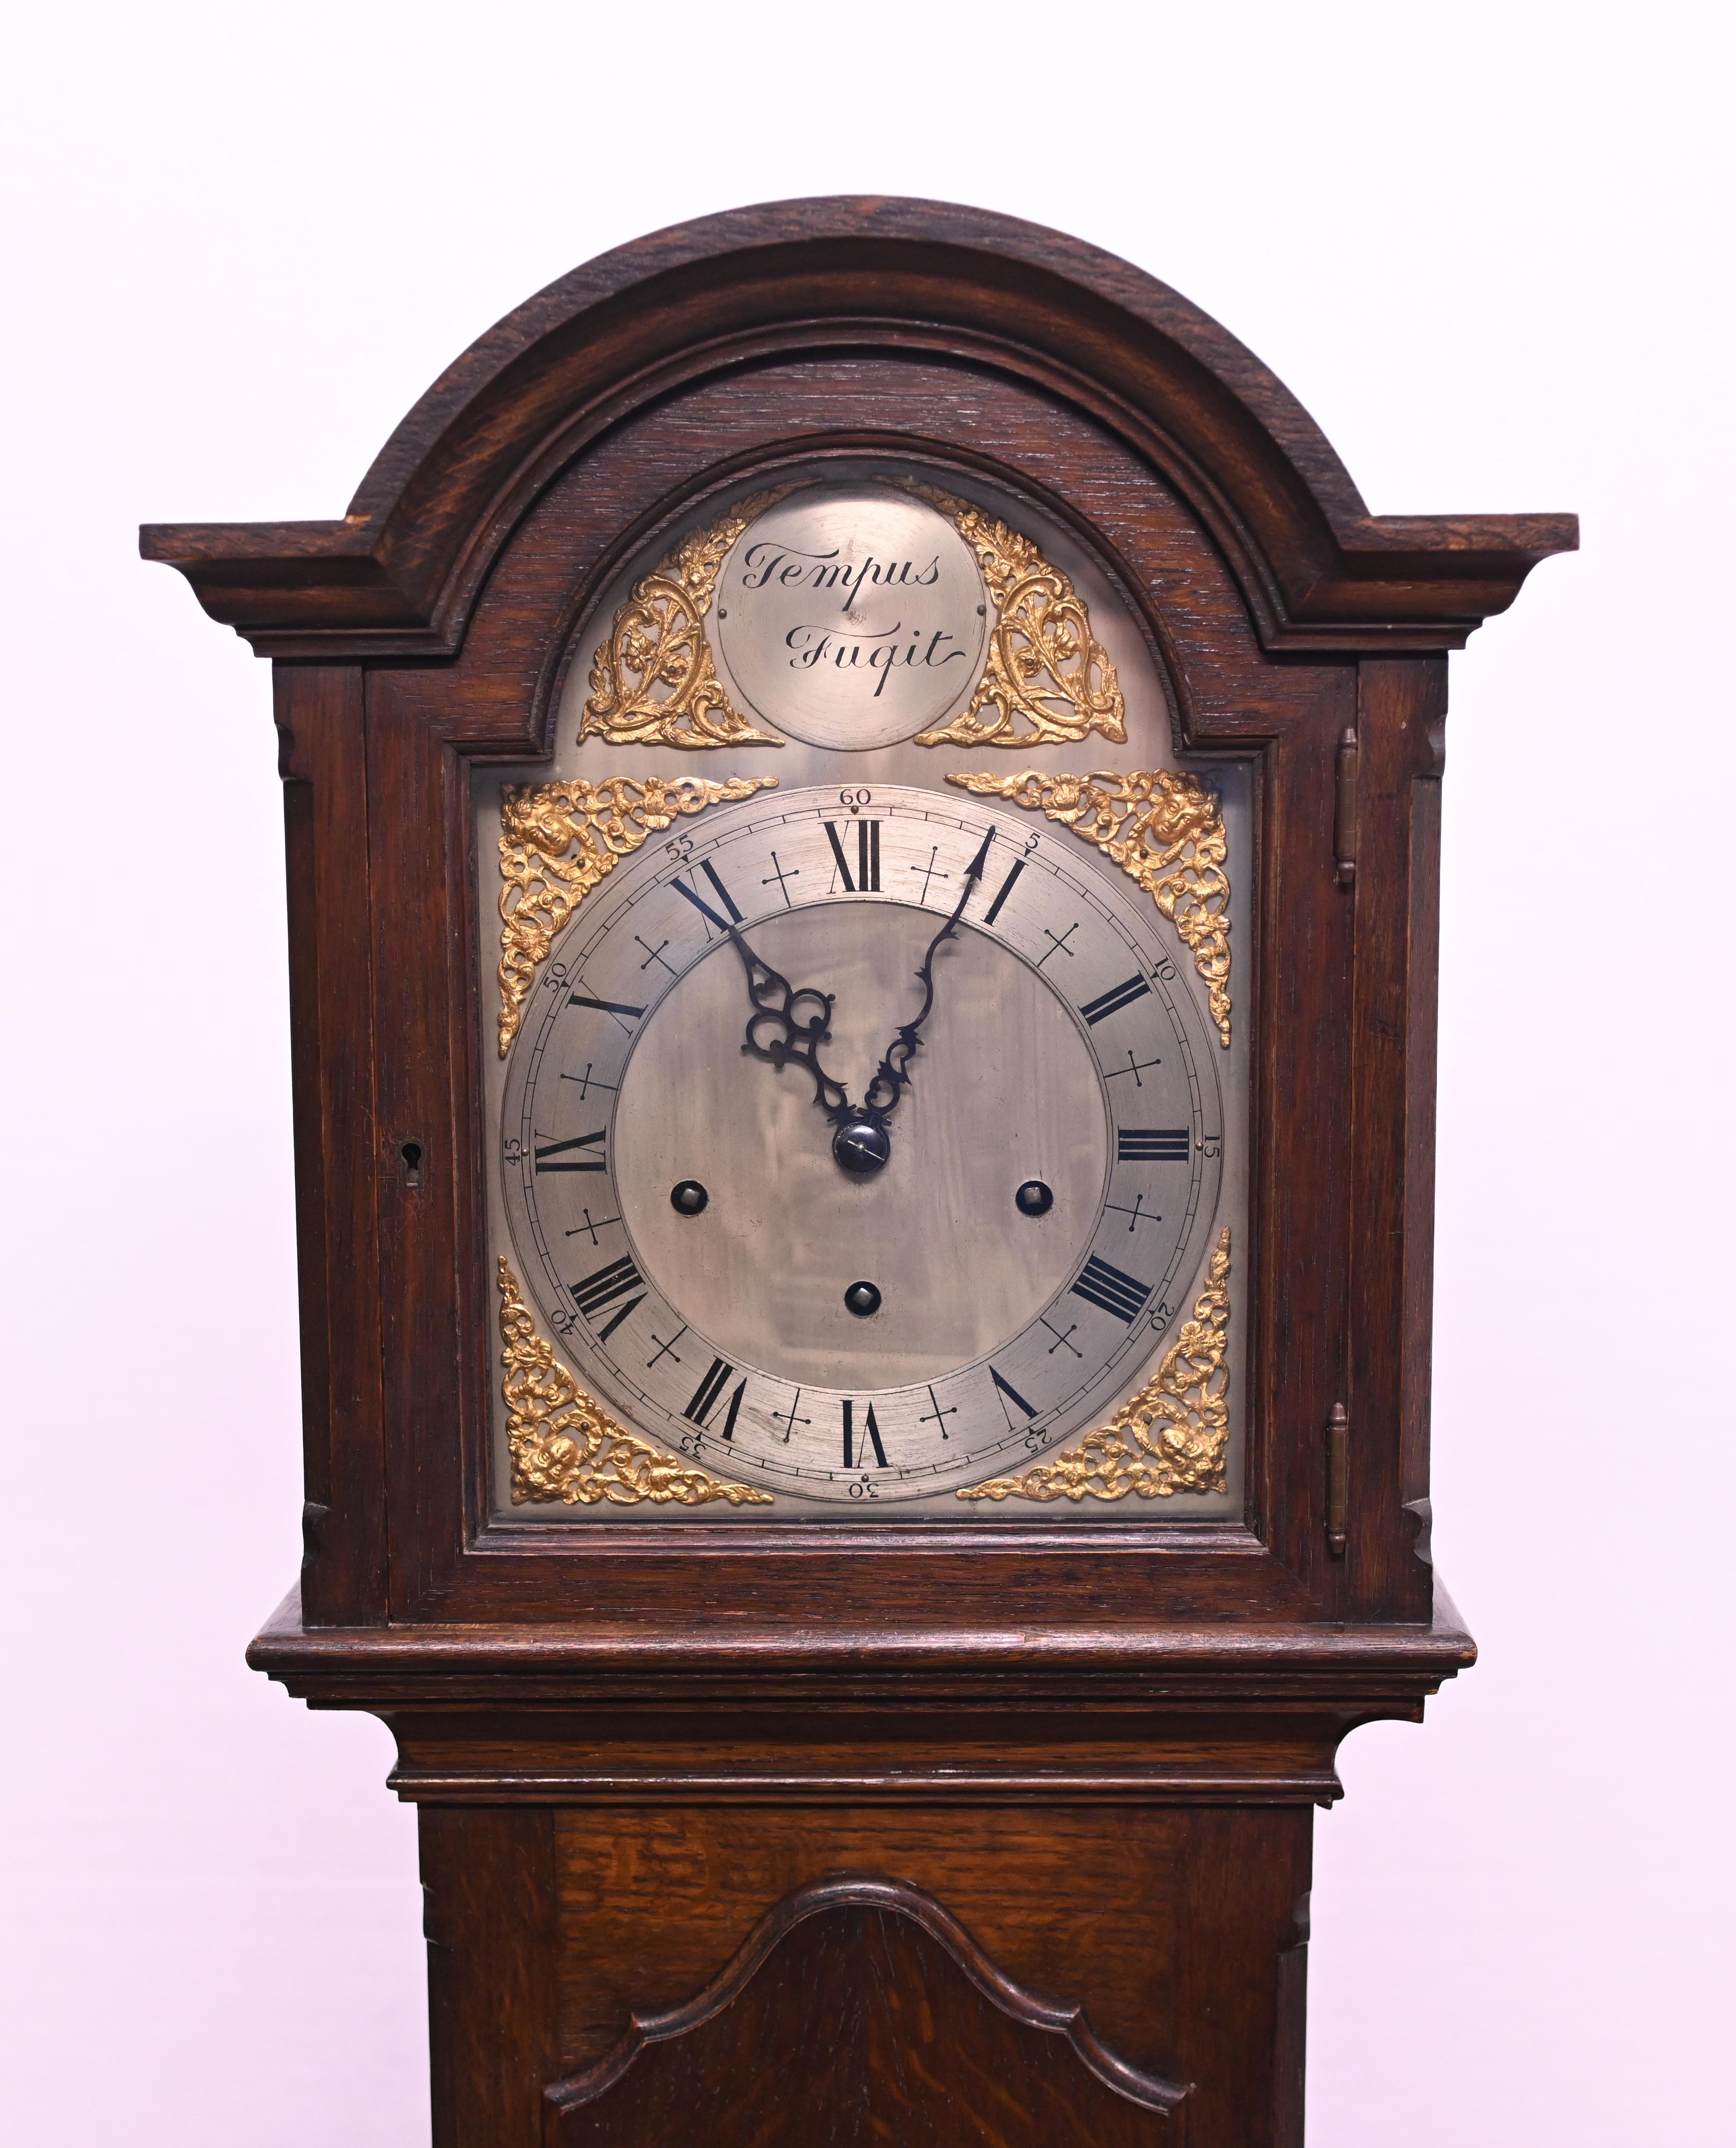 Gorgeous English oak antique grandfather clock
Lovely clock face with a small panel reading 'Tempus Fugit' - Latin for time flies
Features a chiming mechanism
Circa 1920 on this clock
Offered in great shape ready for home use right away
We ship to